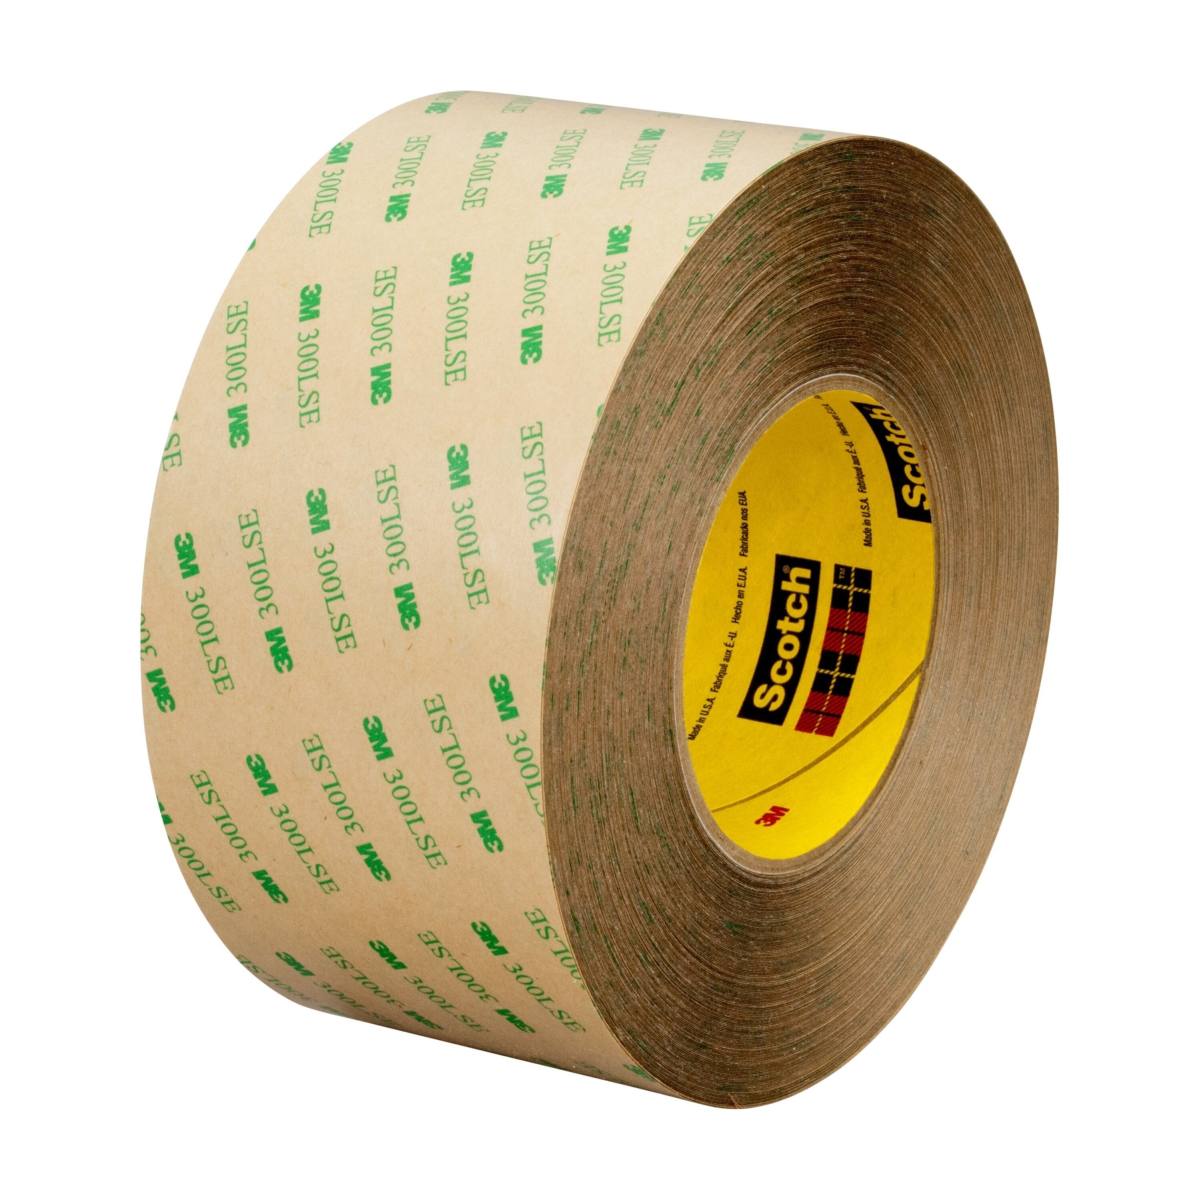 3M Dubbelzijdig plakband met polyester drager 93020LE, transparant, 15 mm x 55 m, 0,20 mm